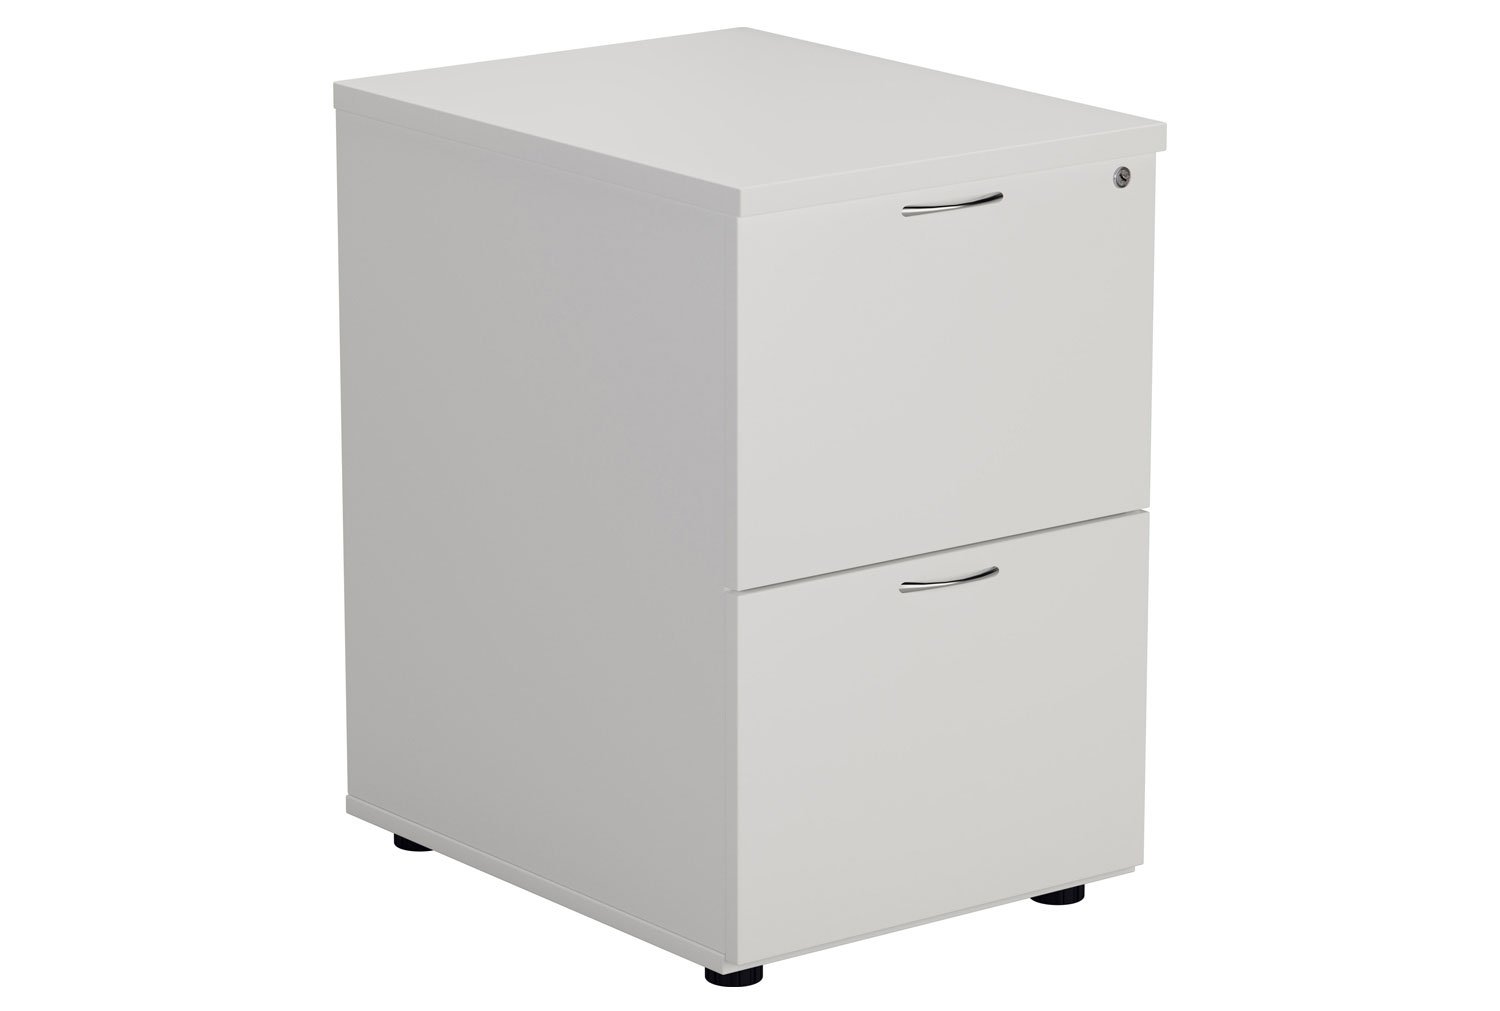 Proteus Wooden Filing Cabinet, 2 Drawer - 47wx60dx71h (cm), White, Express Delivery